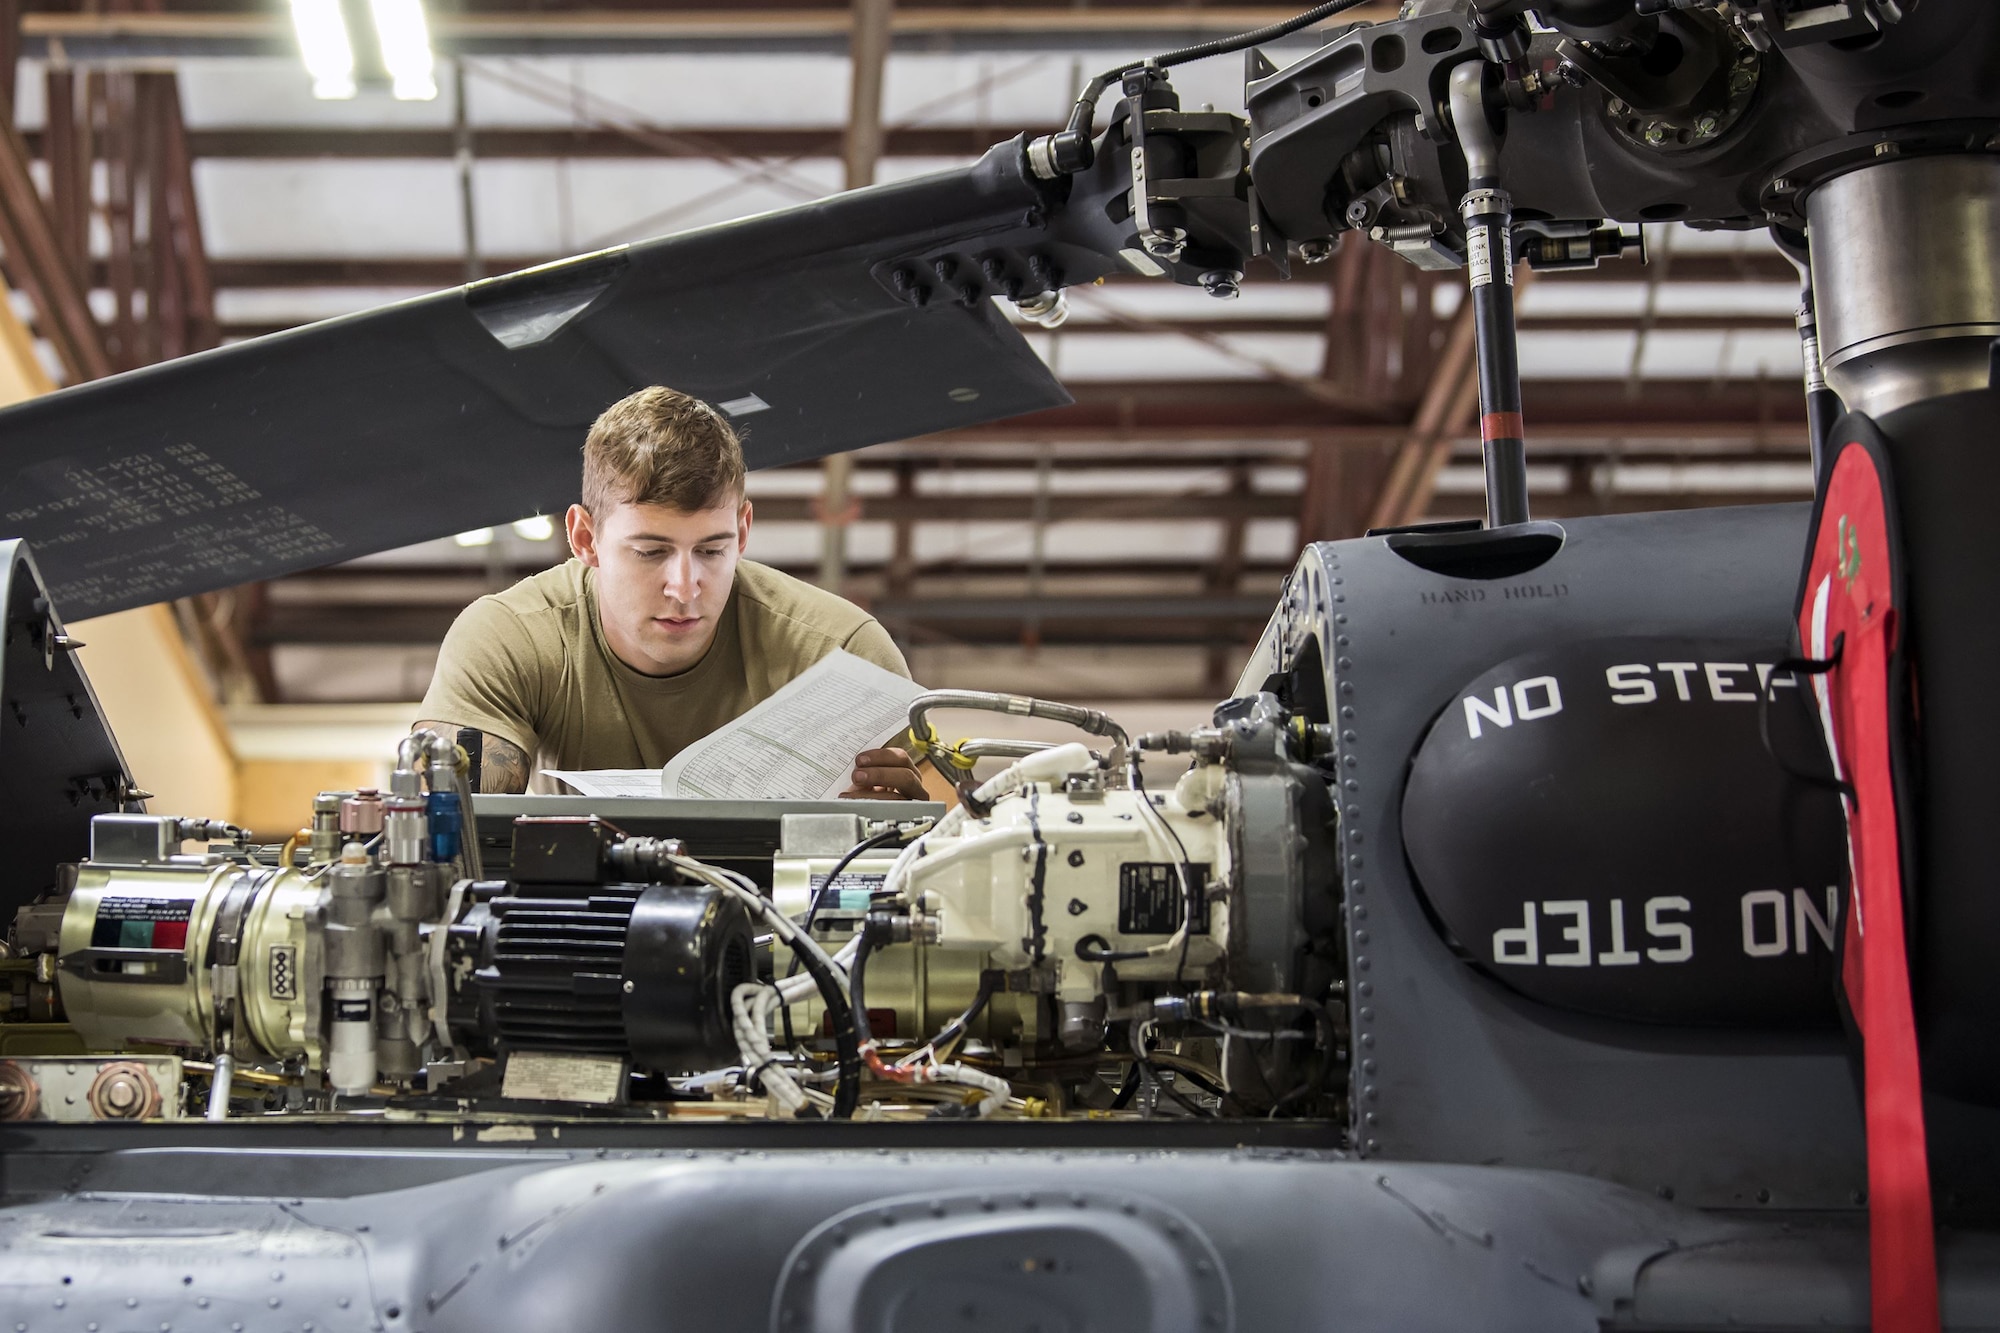 Senior Airman Joshua Herron, 723d Aircraft Maintenance Squadron (AMXS) HH-60G Pave Hawk crew chief, reads a technical order, Jan. 22, 2018, at Moody Air Force Base, Ga. From 16-25 Jan., Airmen from the 723d AMXS performed 216 hours of maintenance on an HH-60 after it returned to Moody following 350 days of depot maintenance at Naval Air Station (NAS) Jacksonville. While at NAS Jacksonville, the HH-60 underwent a complete structural overhaul where it received new internal and external components along with repairs and updated programming. (U.S. Air Force photo by Airman Eugene Oliver)